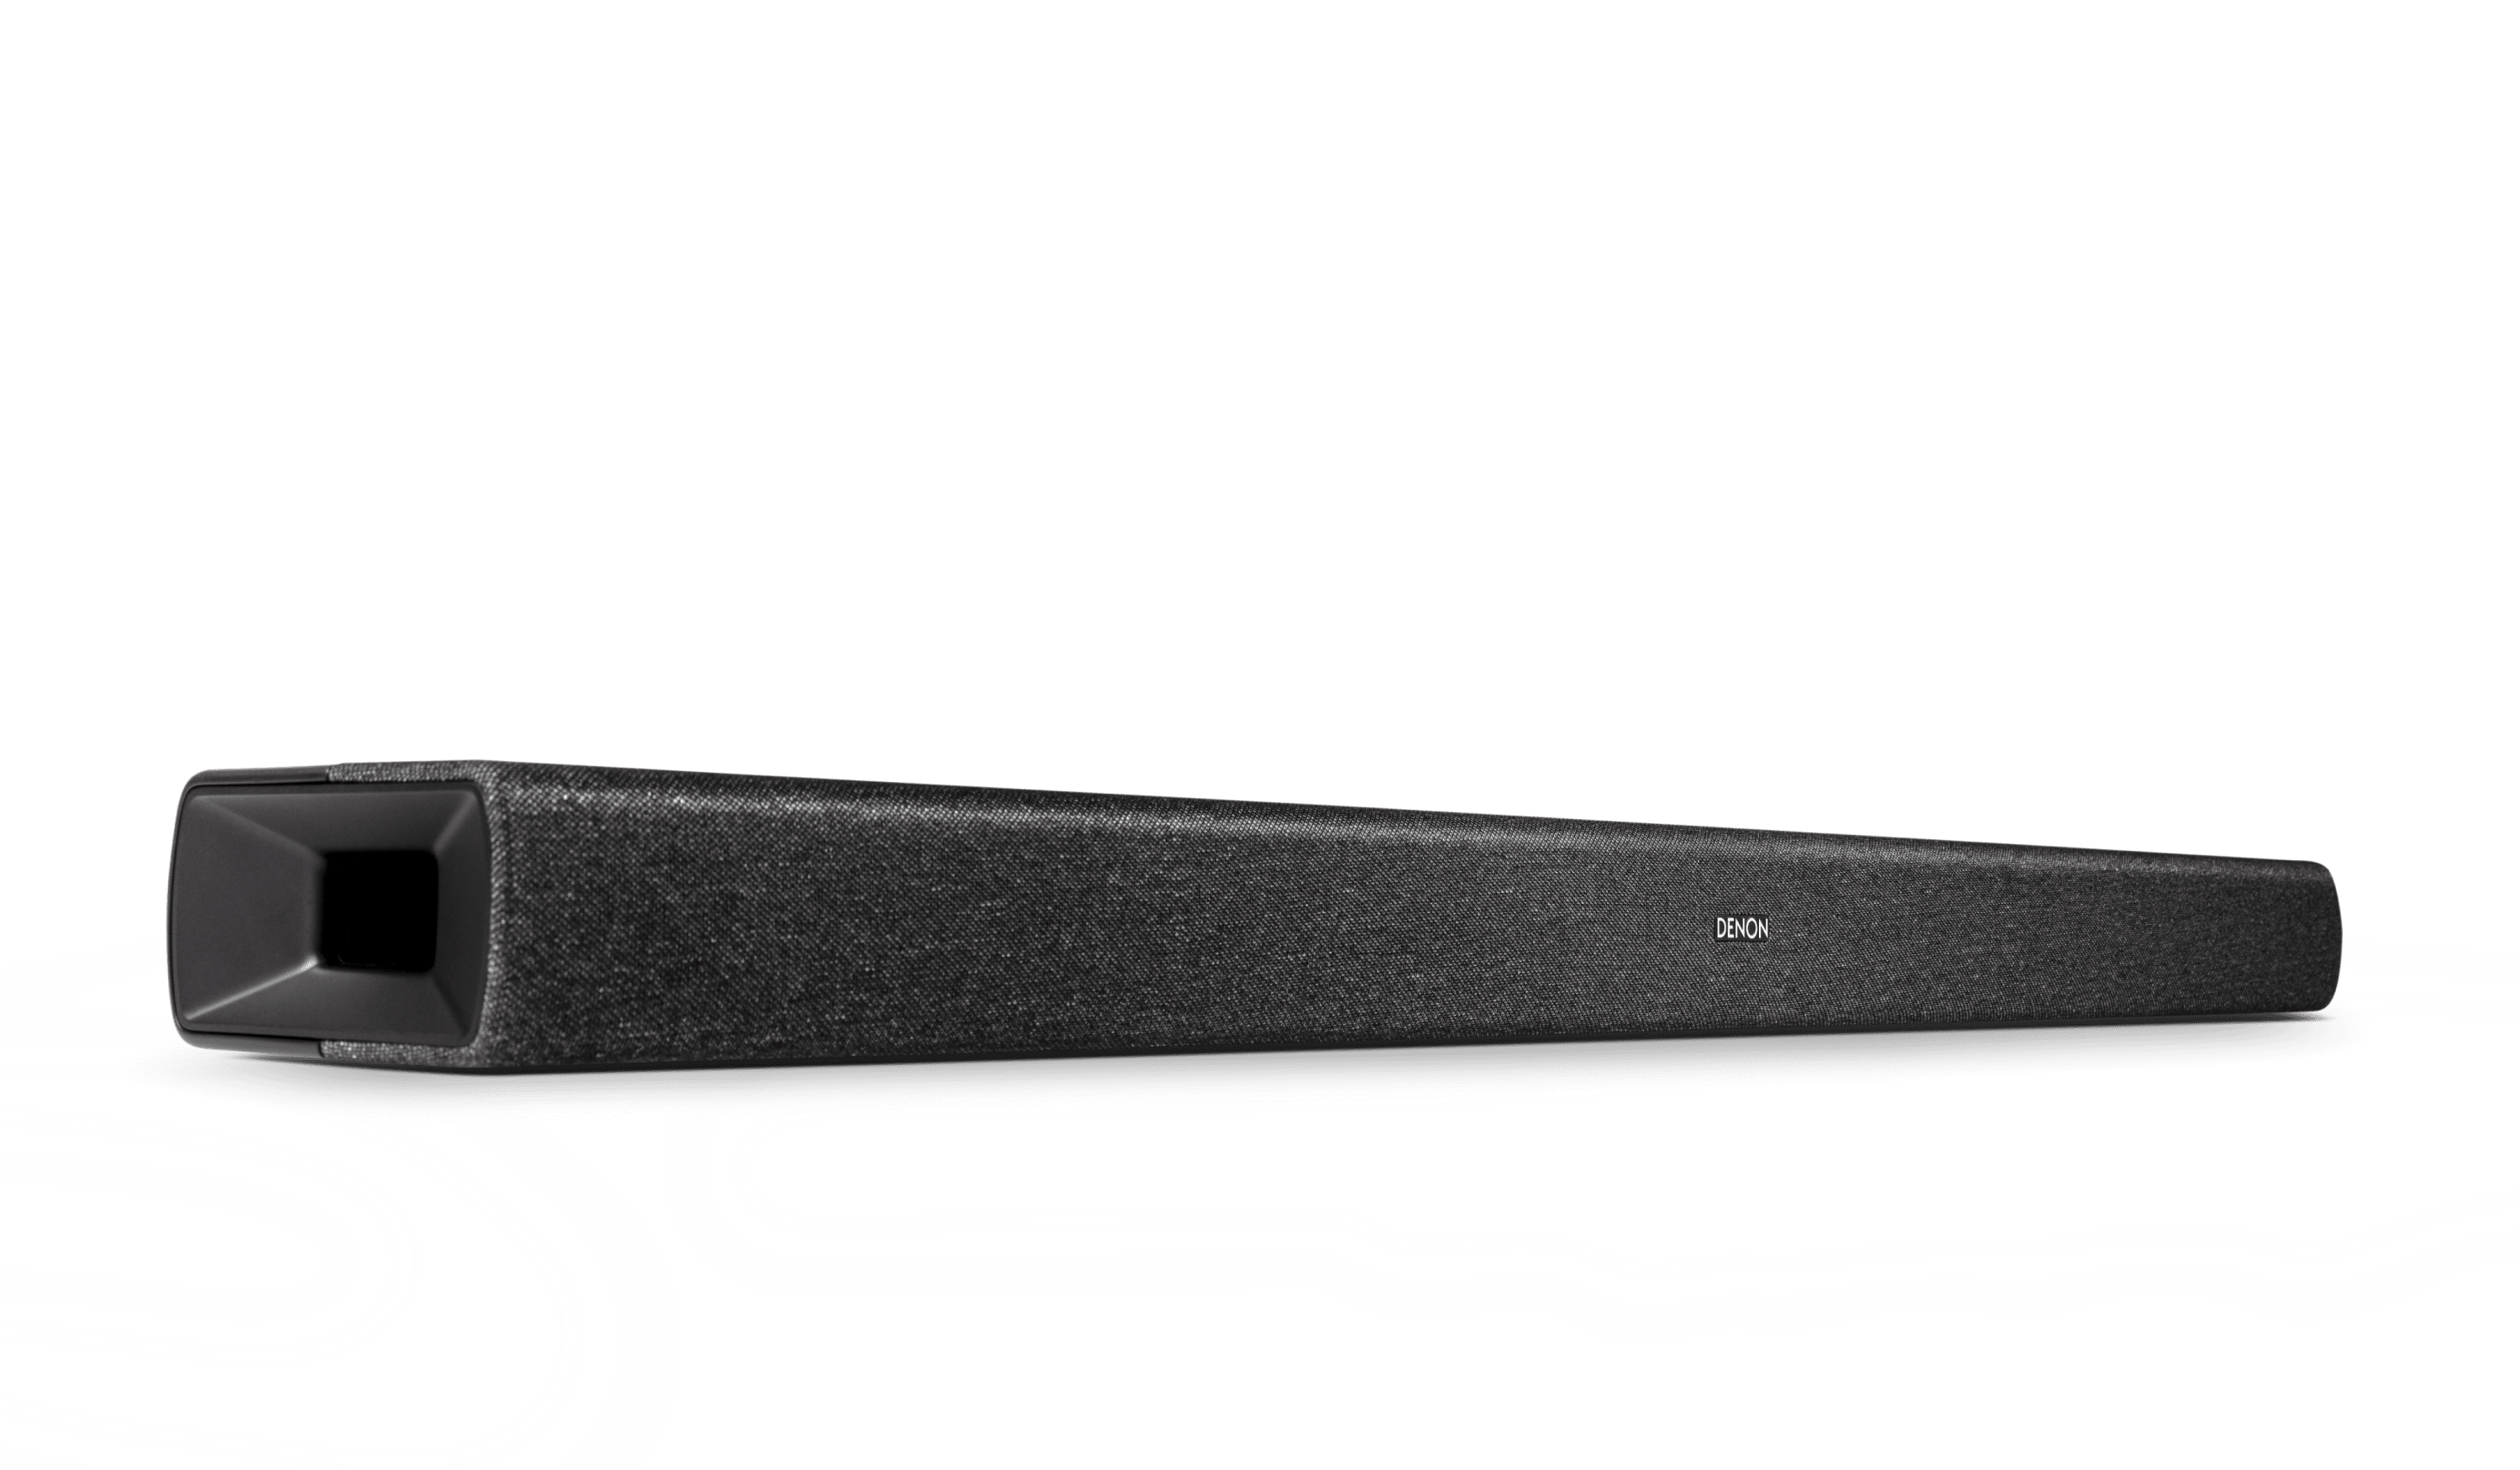 DHT-S217 - Compact Sound Bar with Dolby Atmos | Denon - UK